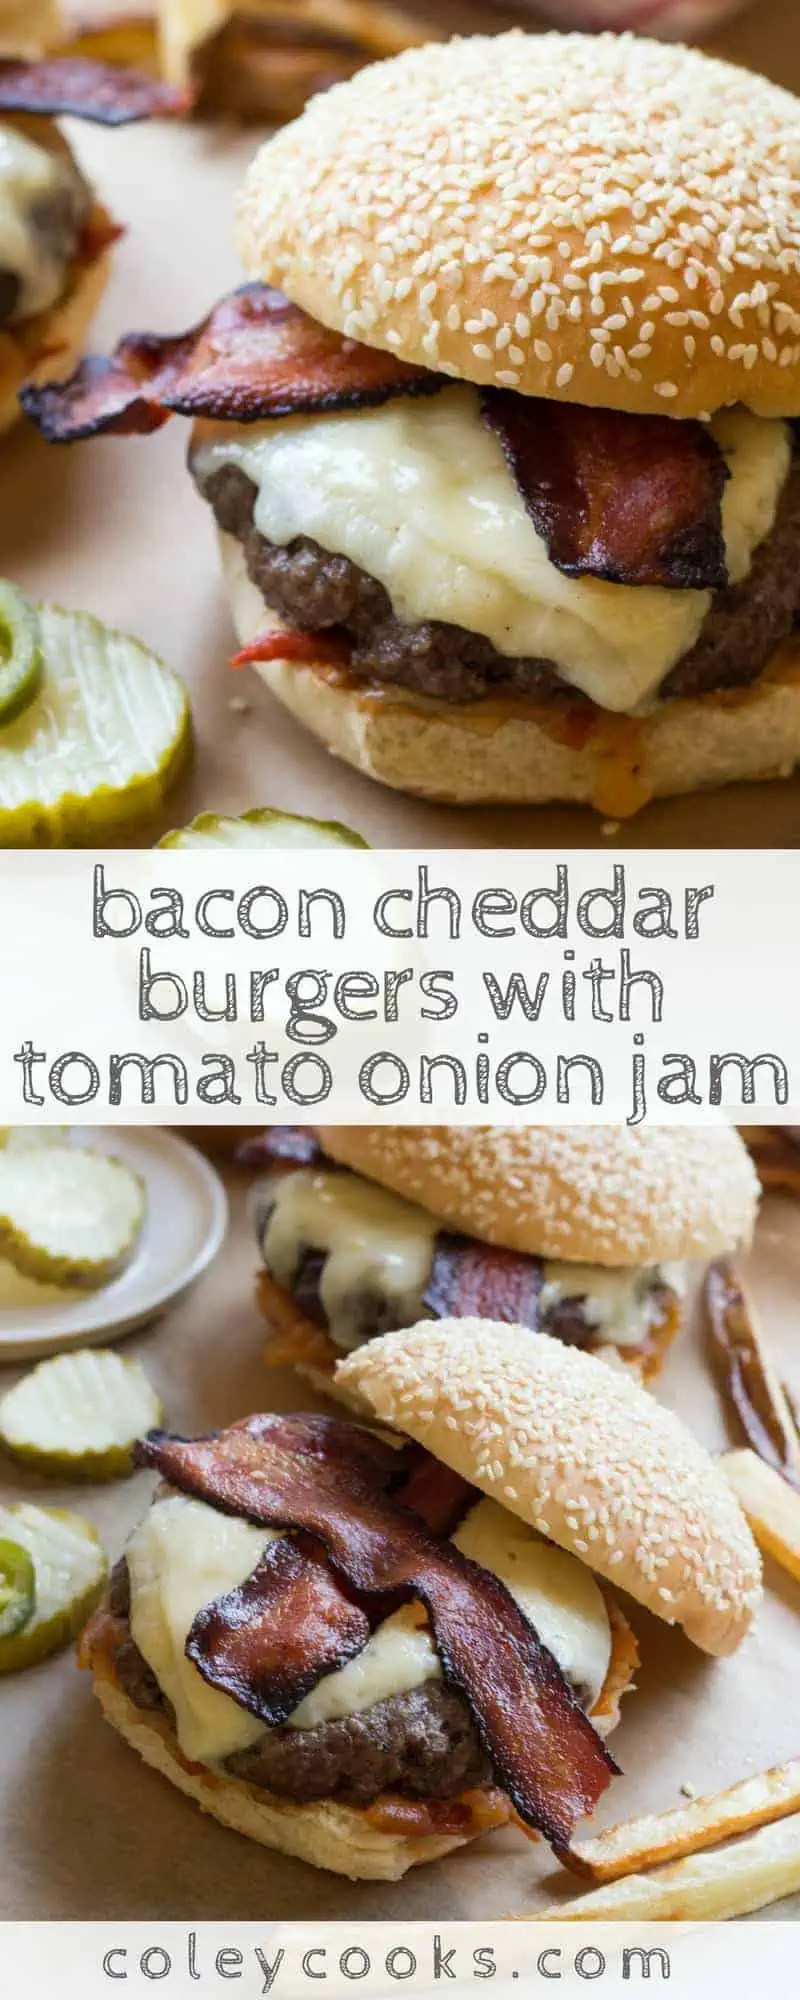 BACON CHEDDAR BURGERS with TOMATO ONION JAM | The best cheeseburgers ever! Smoky bacon, melted sharp cheddar, tangy tomato onion jam - perfection. #burgers #tomatoes | ColeyCooks.com